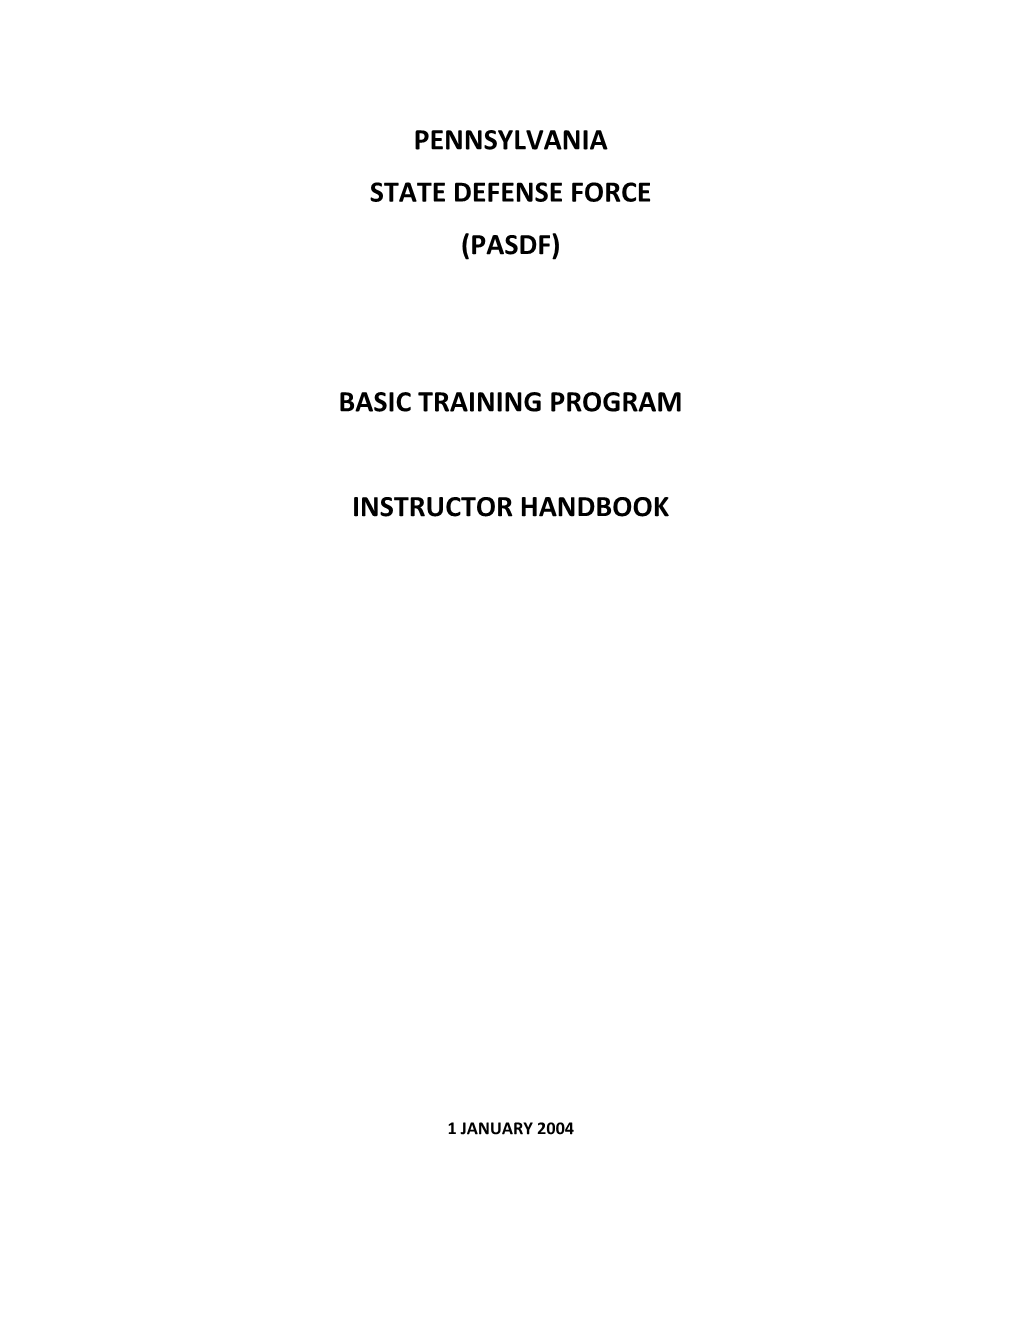 State Defense Force